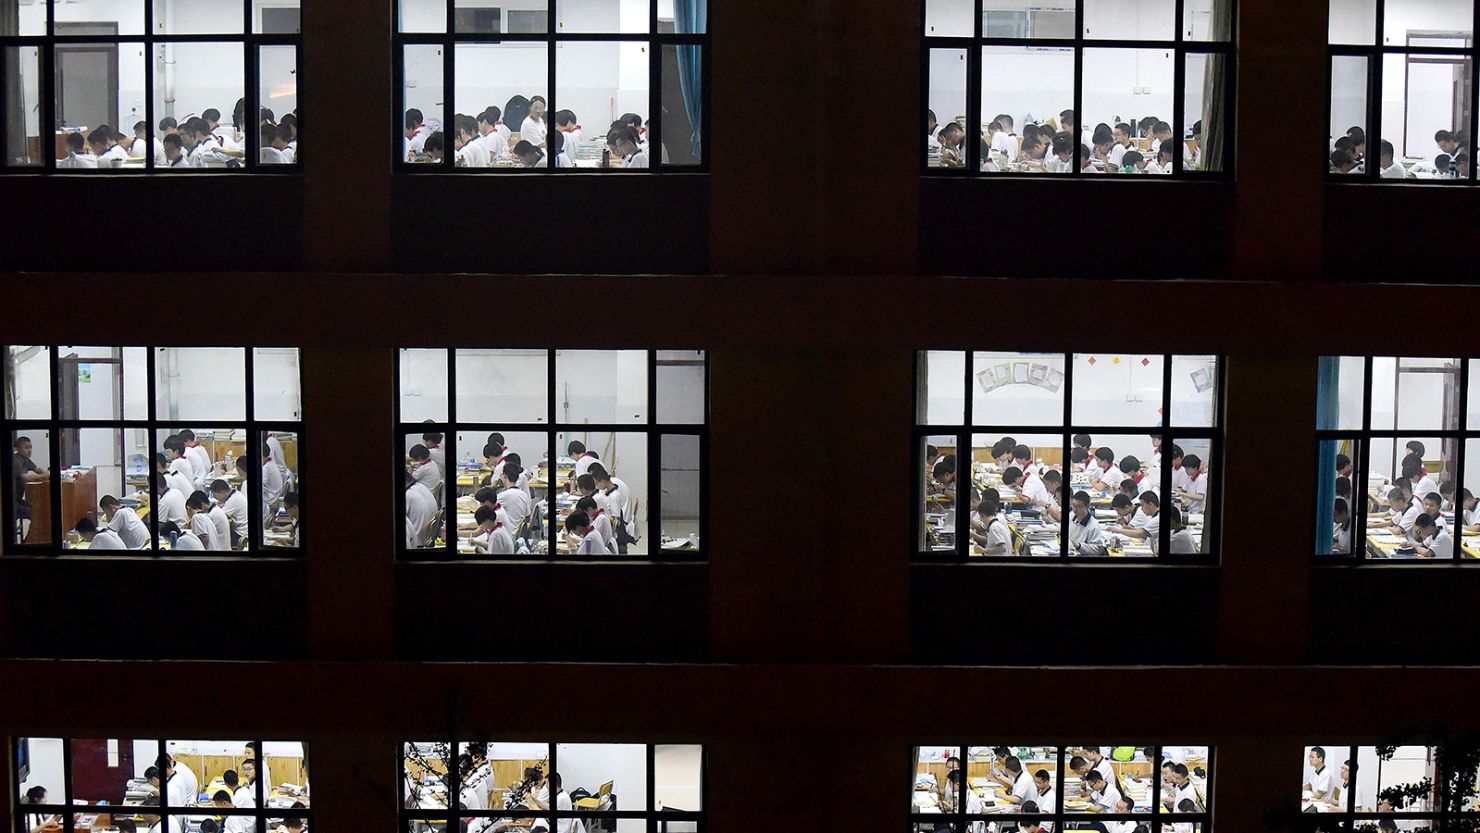 High school students going through exam papers, ahead of the National College Entrance Examination (NCEE), known as "gaokao", in Handan, in China's northern Hebei province.